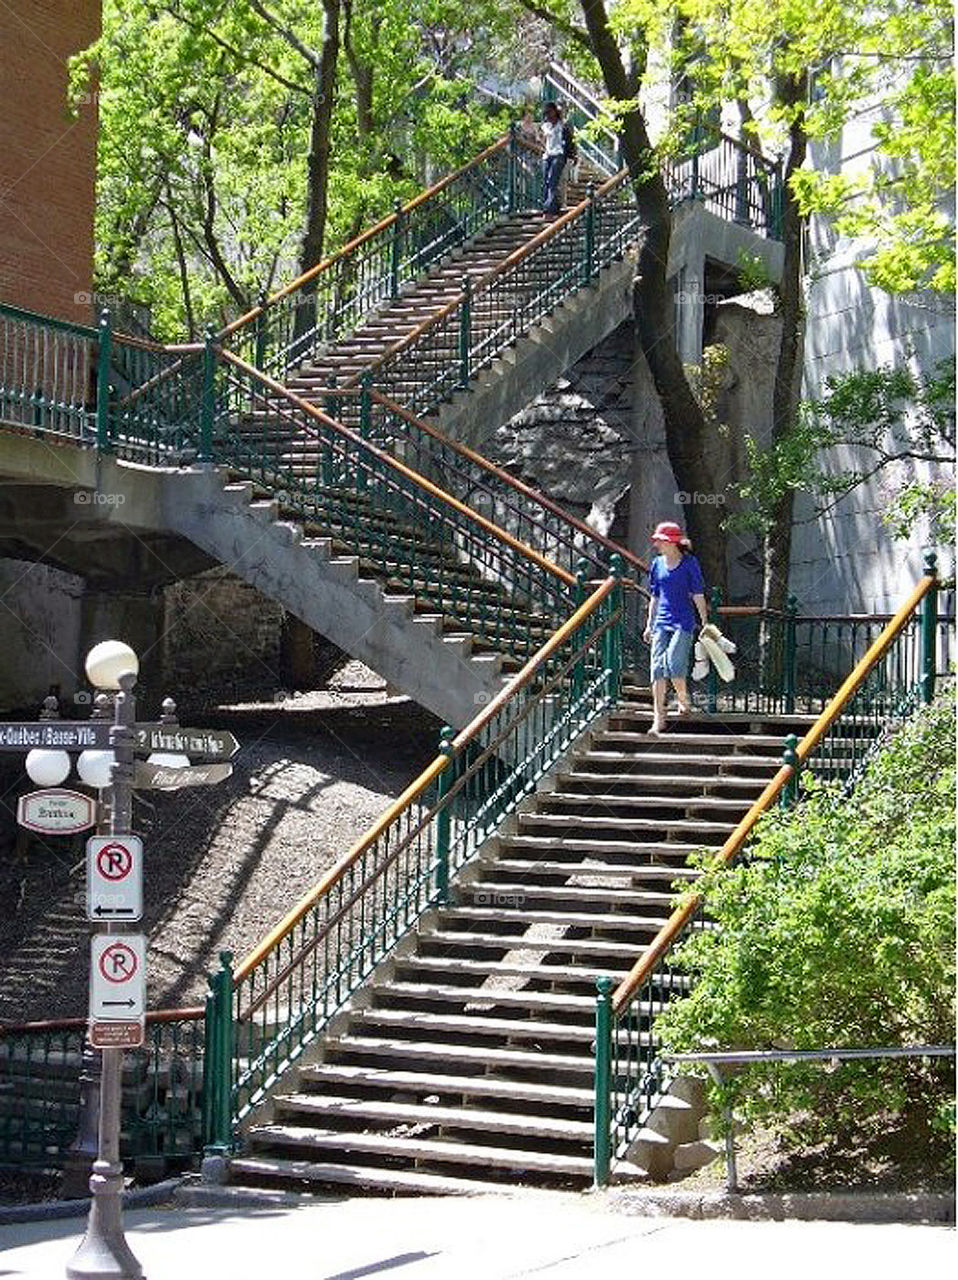 Breakneck Steps (L’Escalier Casse-Cou) in Quebec City, Quebec connects the Upper Town with the Lower Town. 